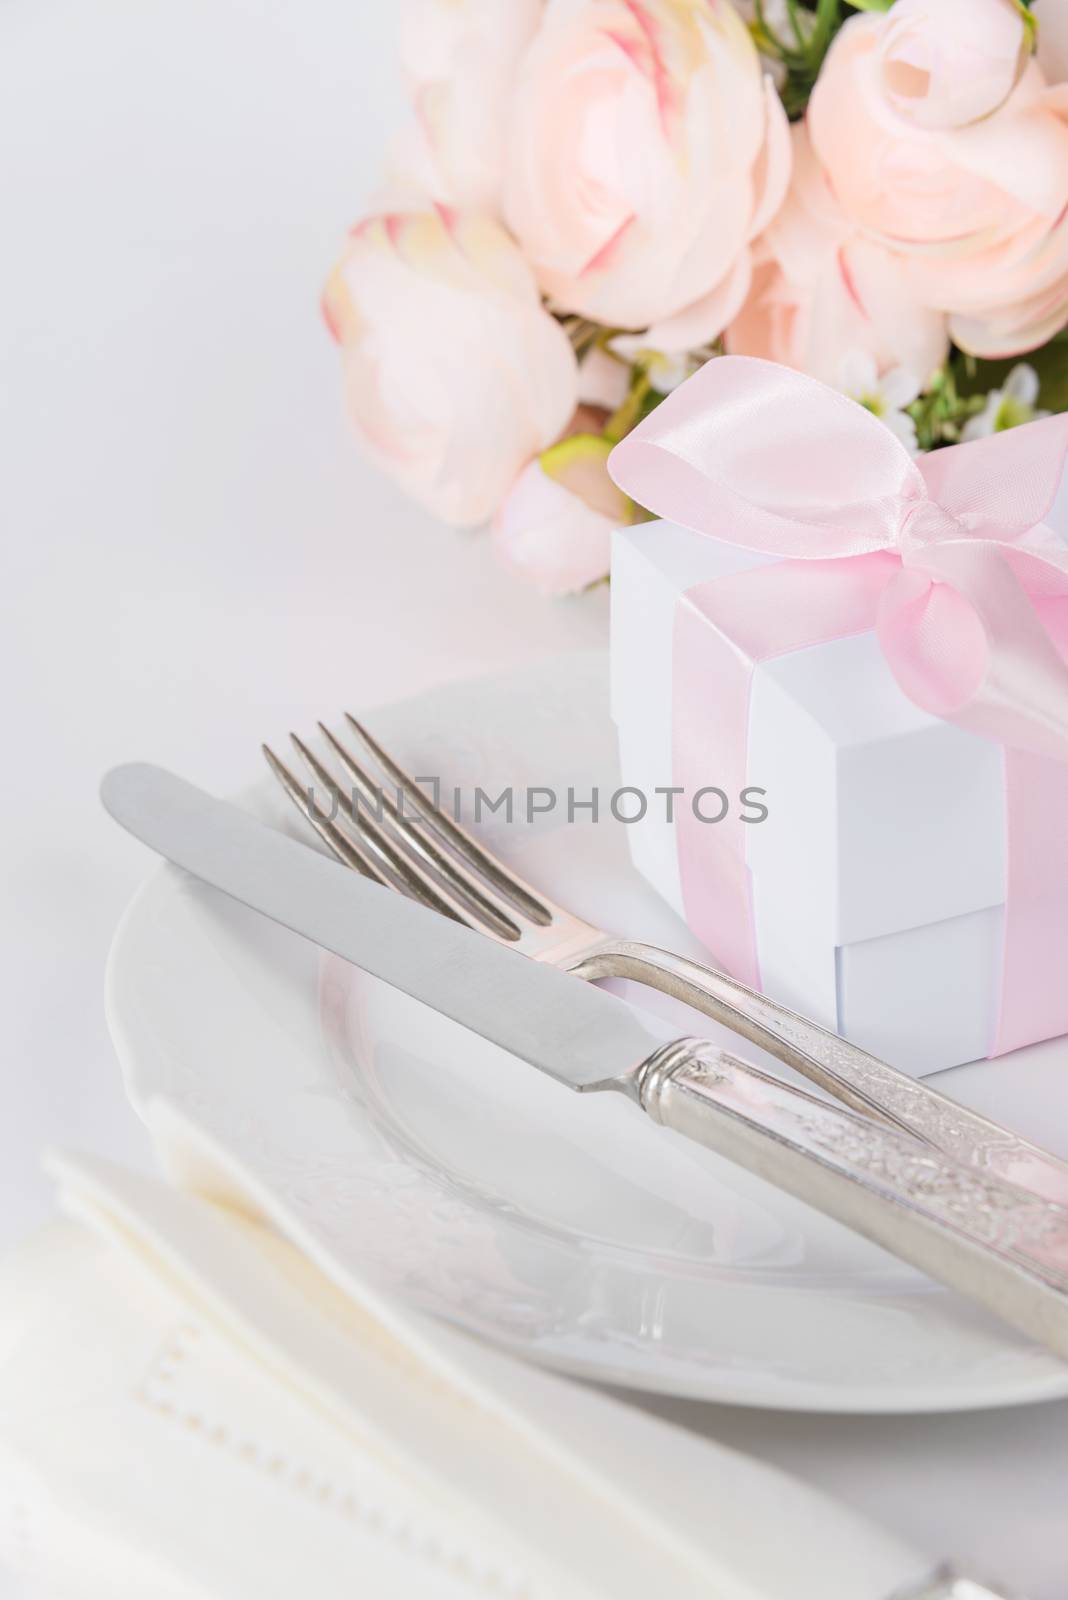 Beautiful decorated table with white plates, gift box with a pink ribbon, cutlery and pink flowers on white background, with space for text